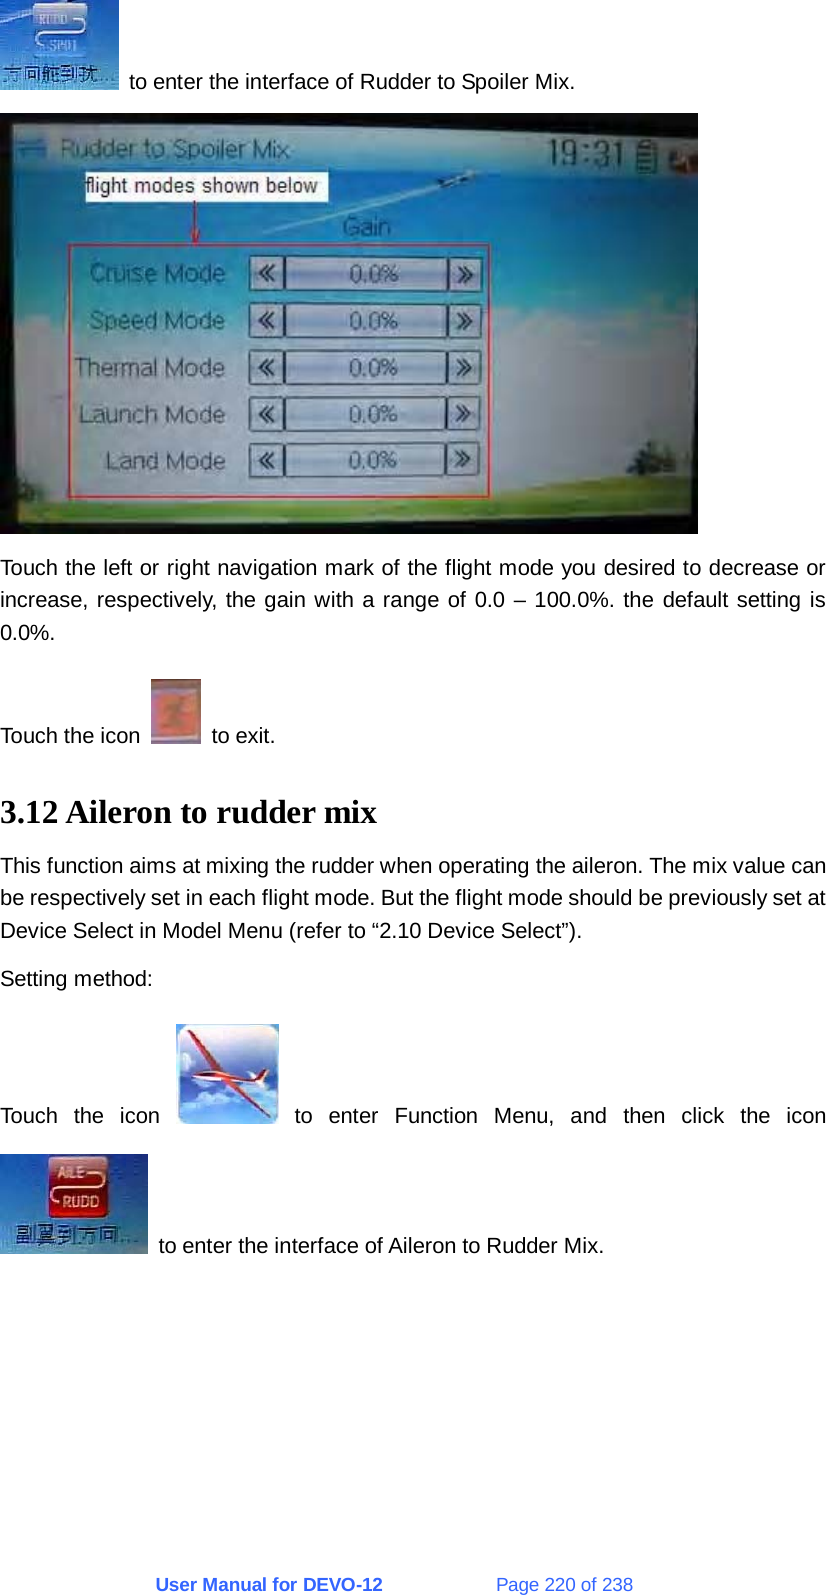 User Manual for DEVO-12             Page 220 of 238   to enter the interface of Rudder to Spoiler Mix.  Touch the left or right navigation mark of the flight mode you desired to decrease or increase, respectively, the gain with a range of 0.0 – 100.0%. the default setting is 0.0%. Touch the icon   to exit. 3.12 Aileron to rudder mix This function aims at mixing the rudder when operating the aileron. The mix value can be respectively set in each flight mode. But the flight mode should be previously set at Device Select in Model Menu (refer to “2.10 Device Select”). Setting method: Touch the icon   to enter Function Menu, and then click the icon   to enter the interface of Aileron to Rudder Mix. 